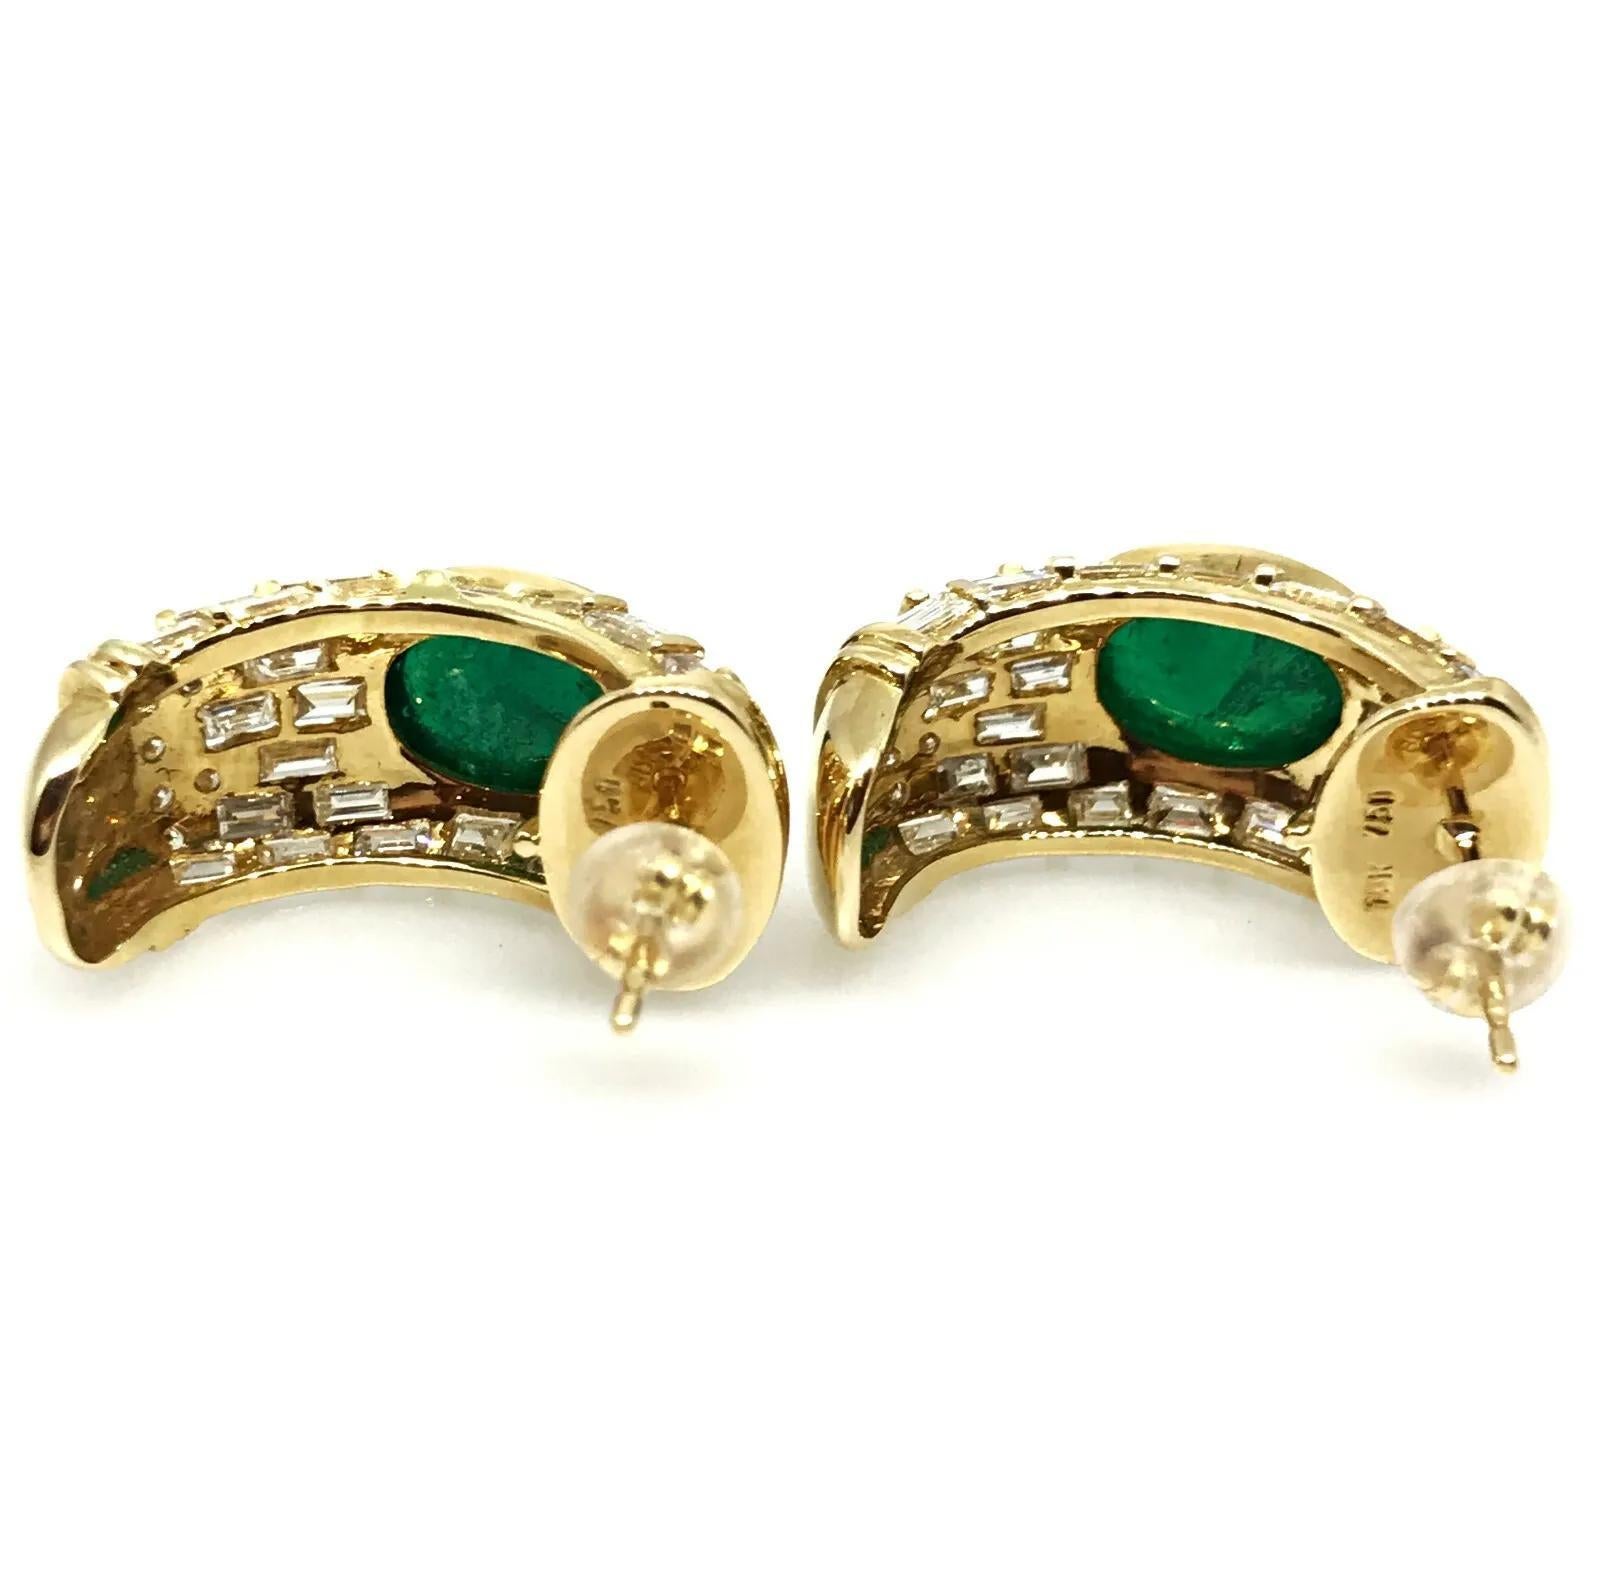 Estate Emerald and Diamond Half Hoop Earrings in 18k Yellow Gold In Good Condition For Sale In La Jolla, CA